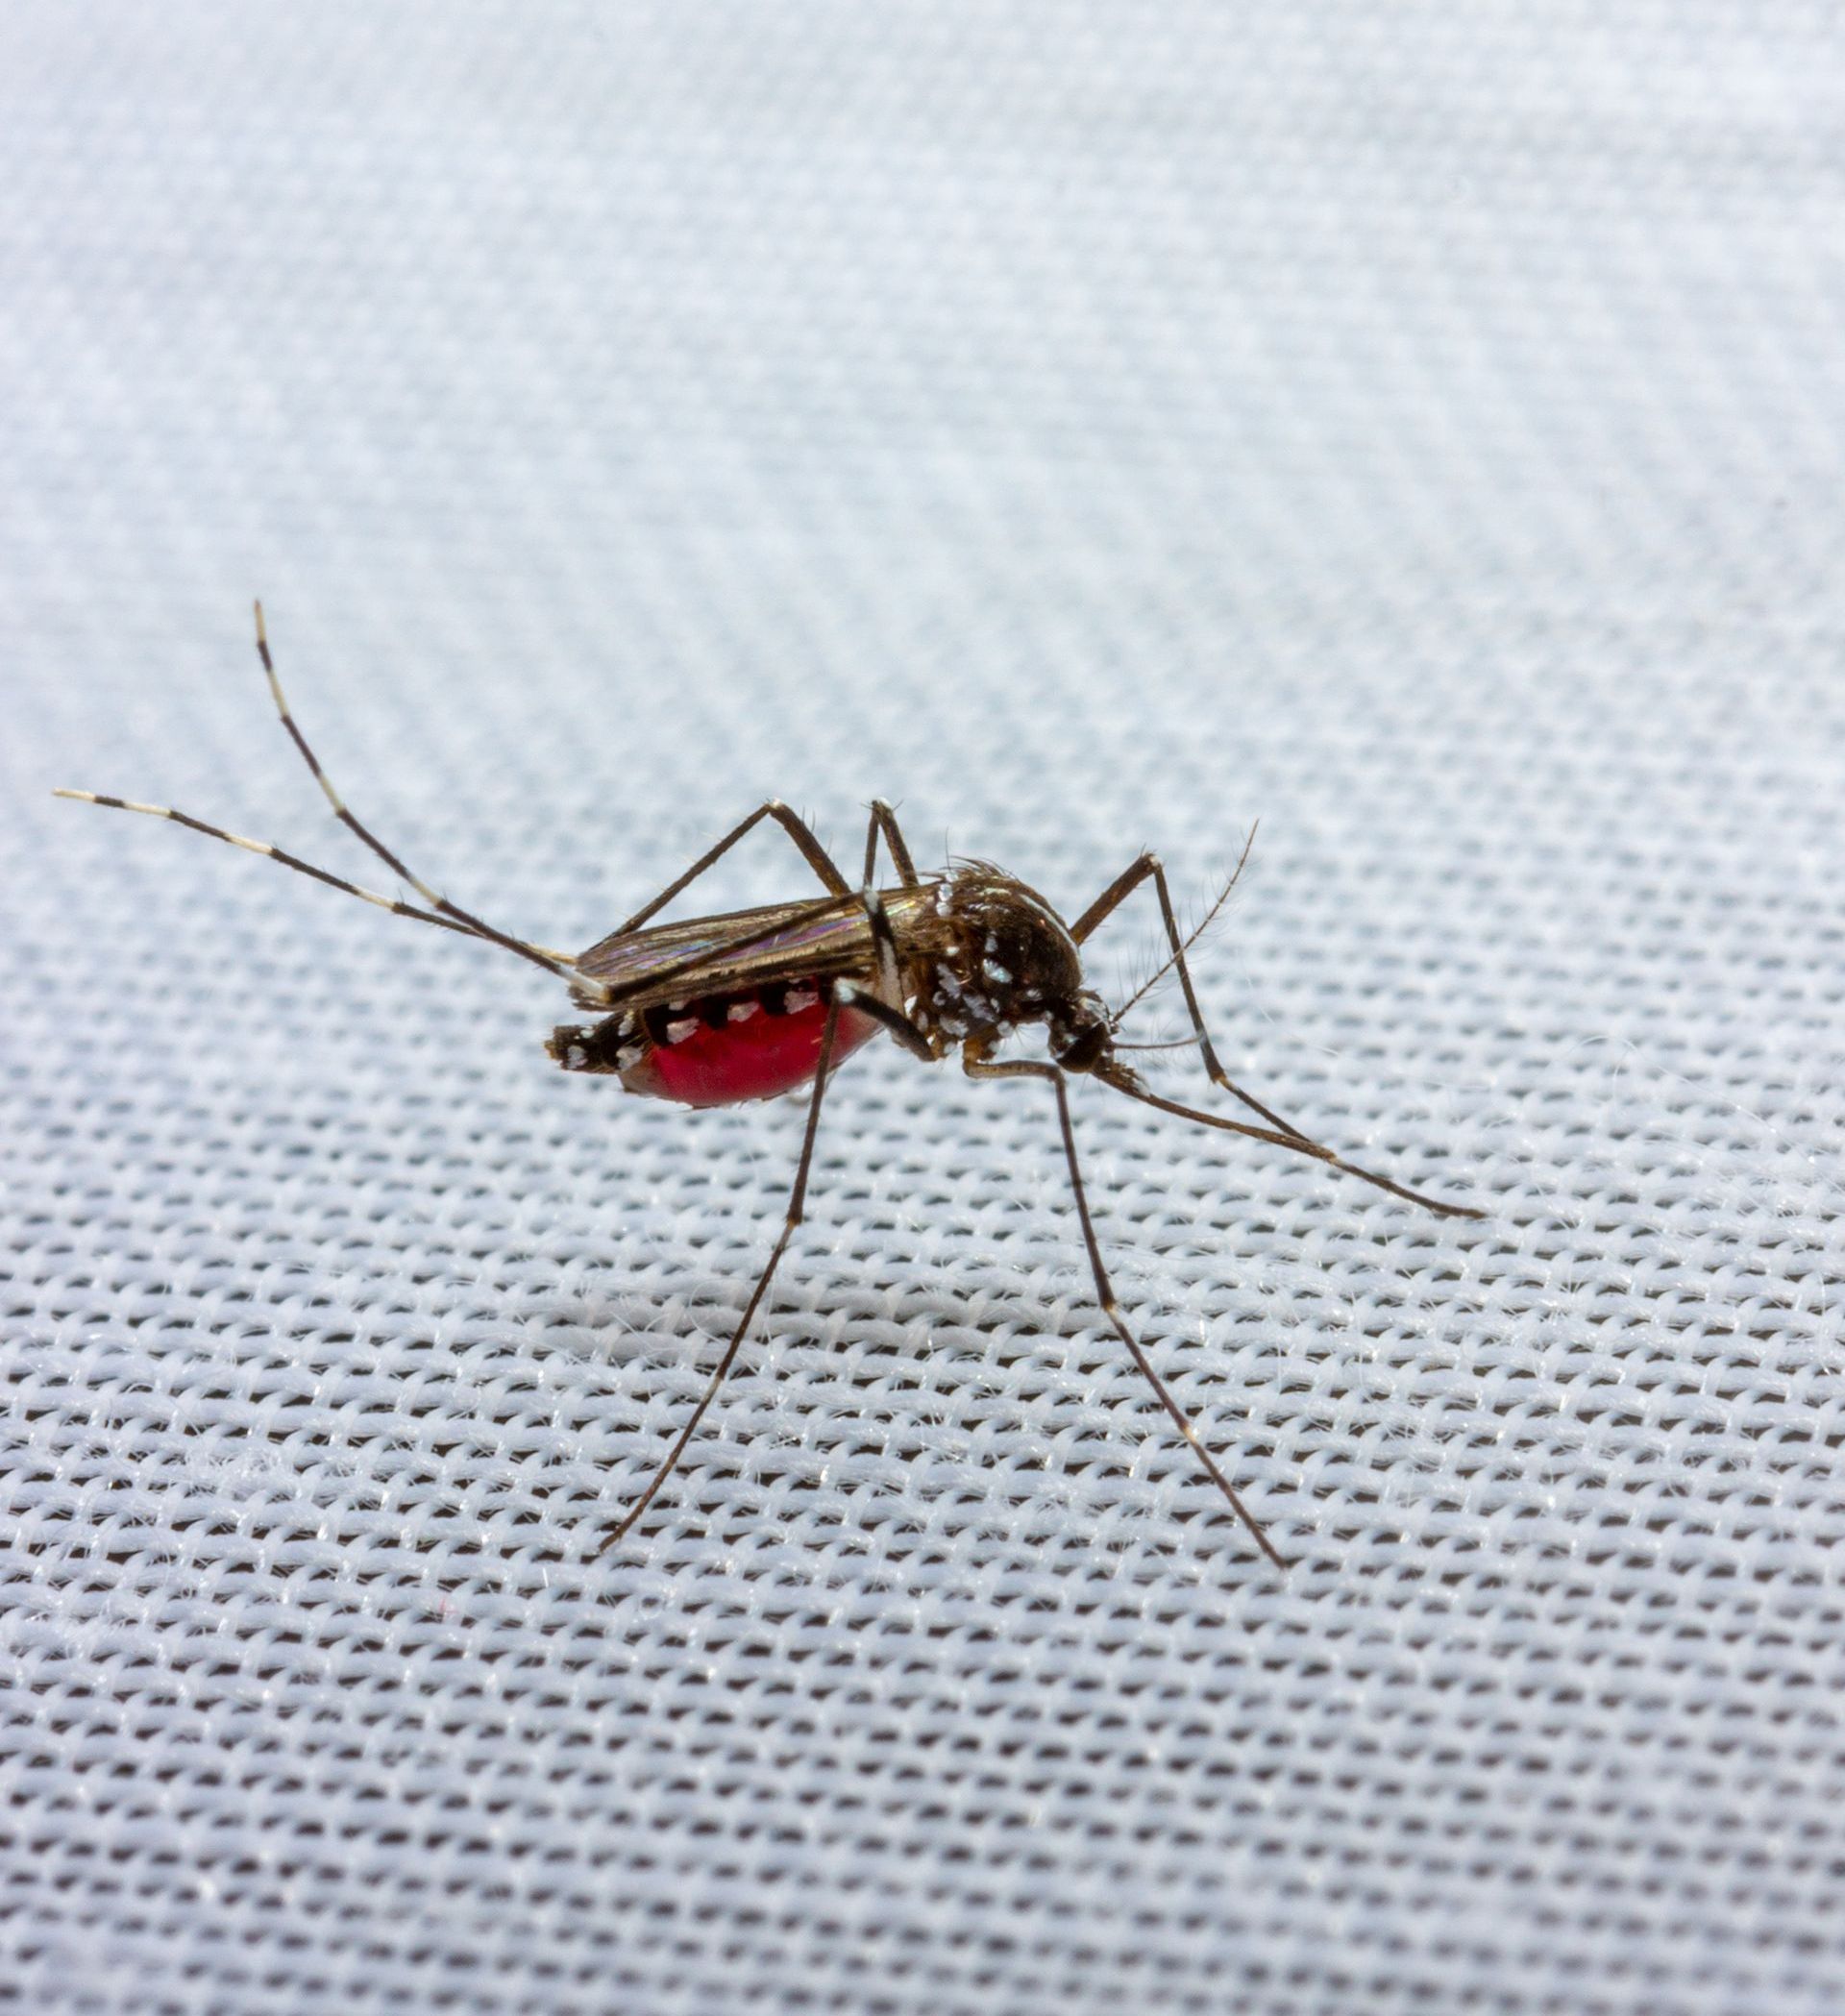 a close up of a mosquito on a white cloth